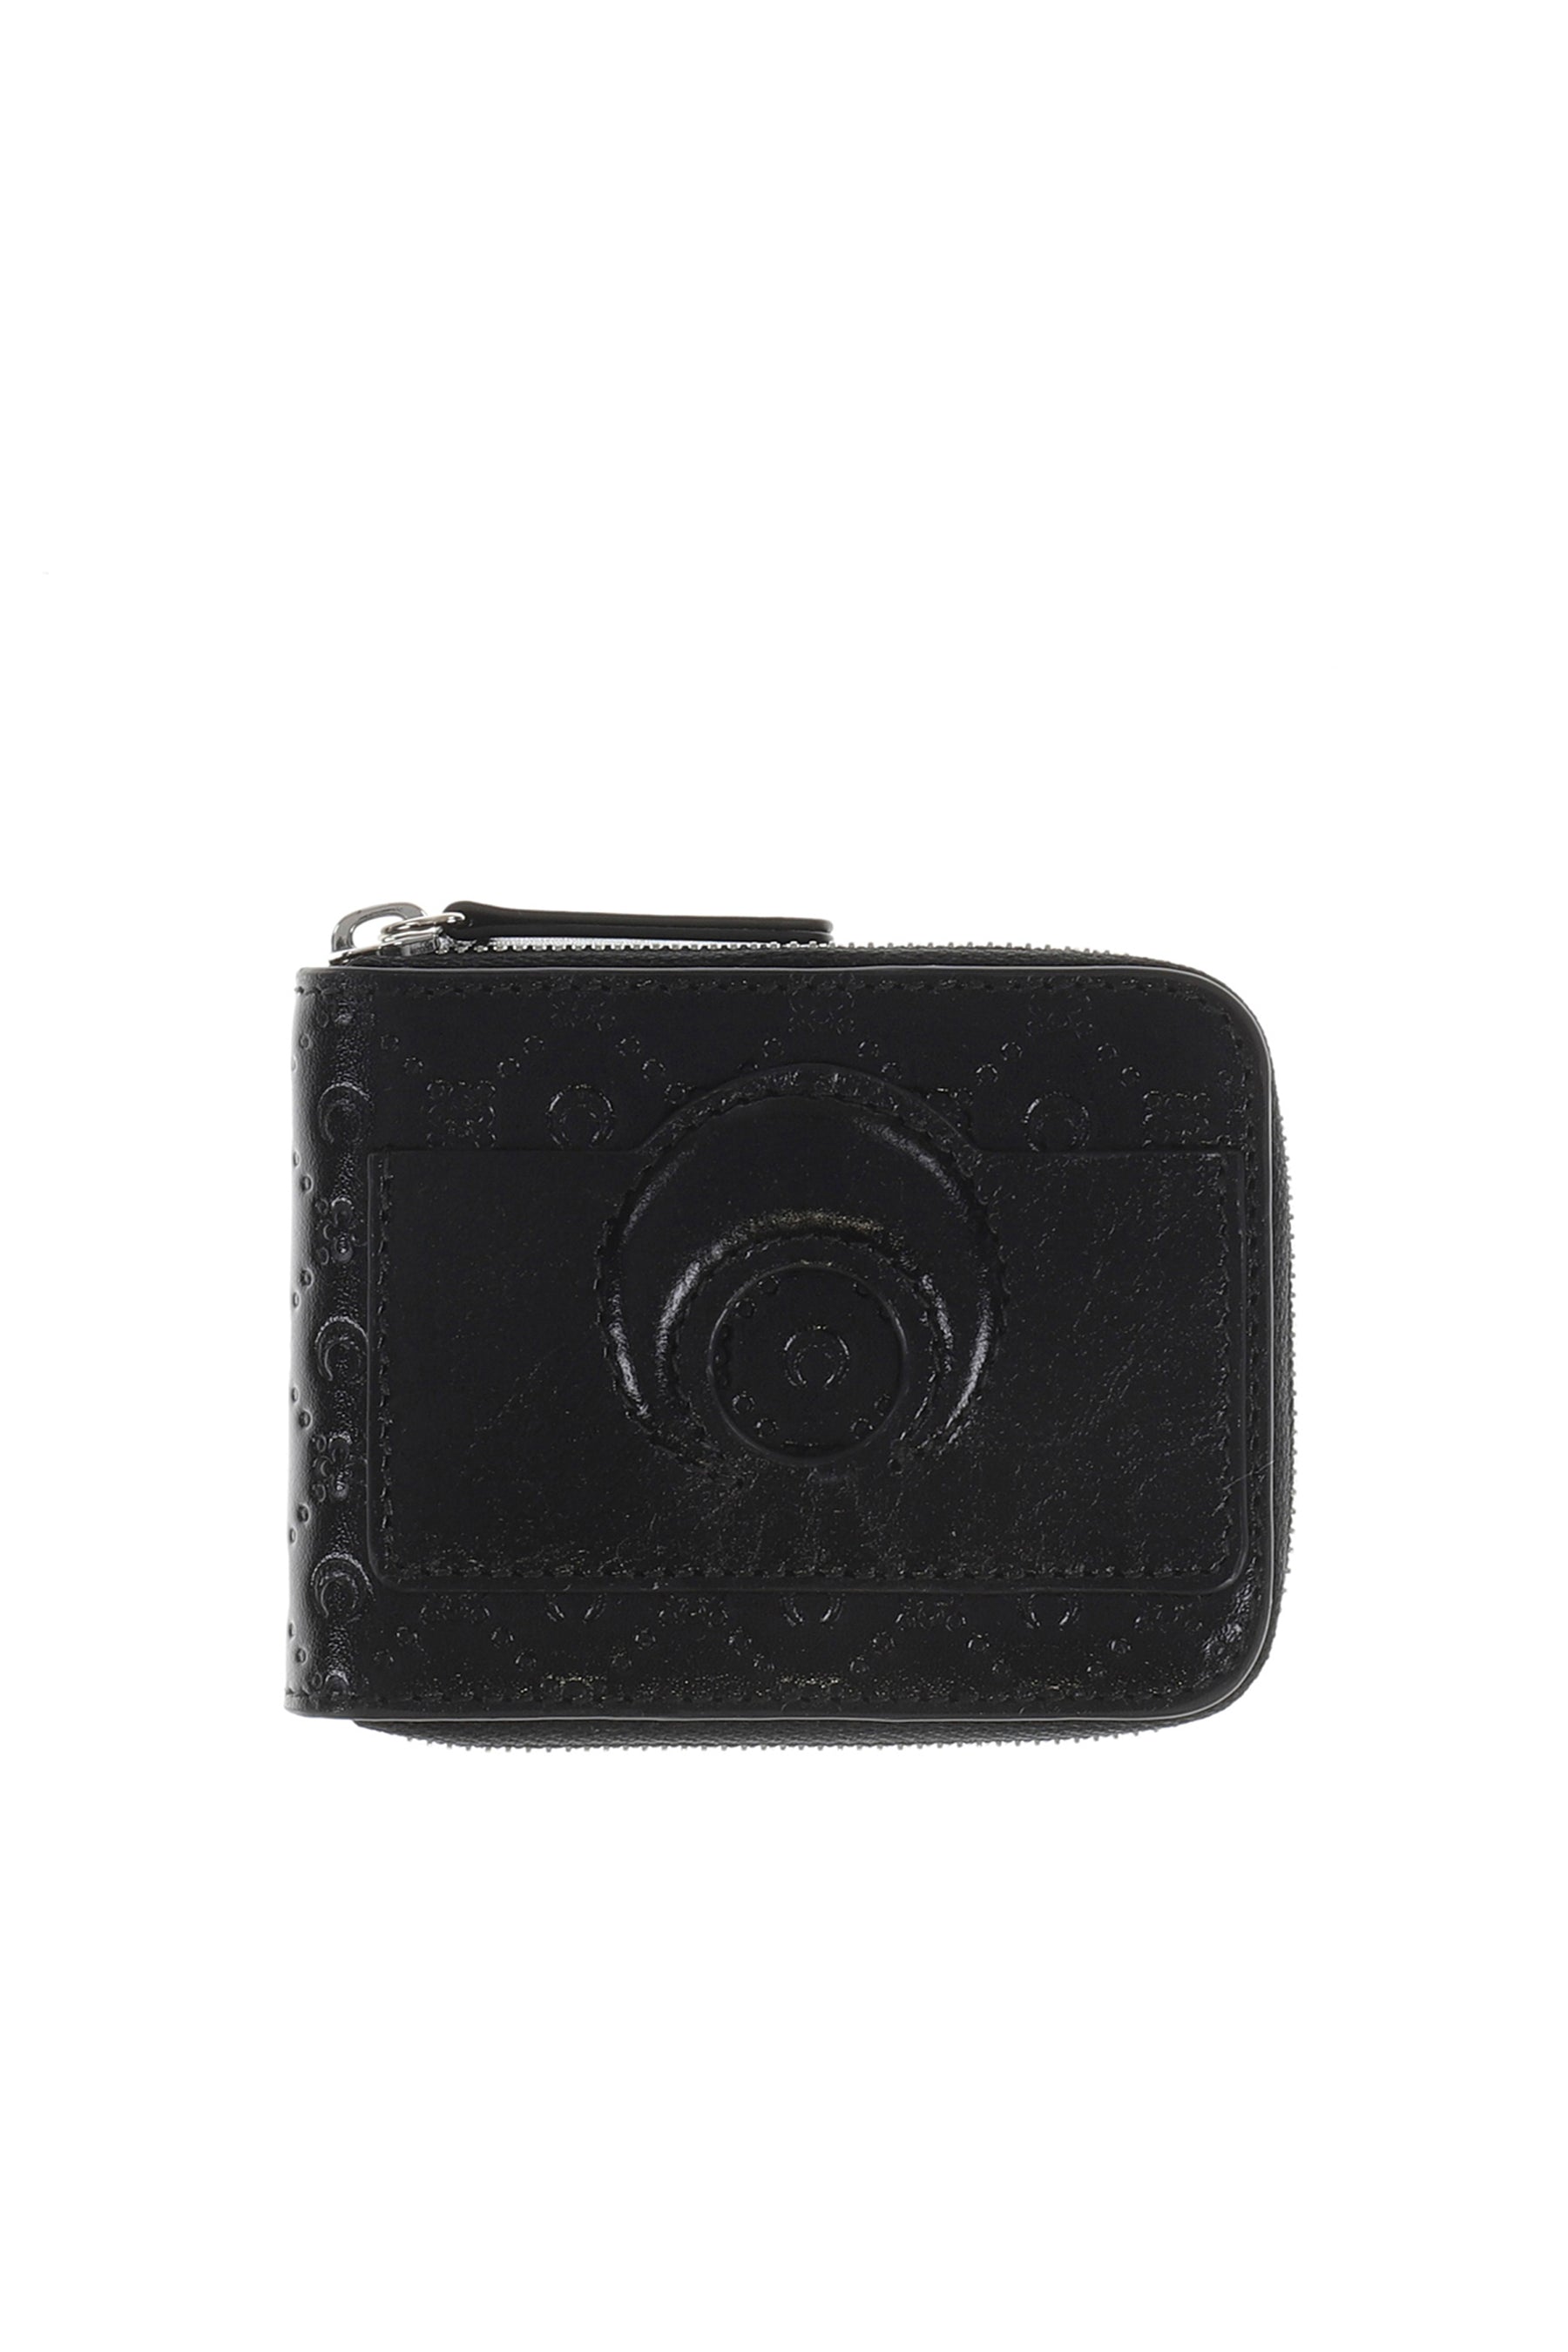 RECYCLED LEATHER WALLET / BK99 BLK